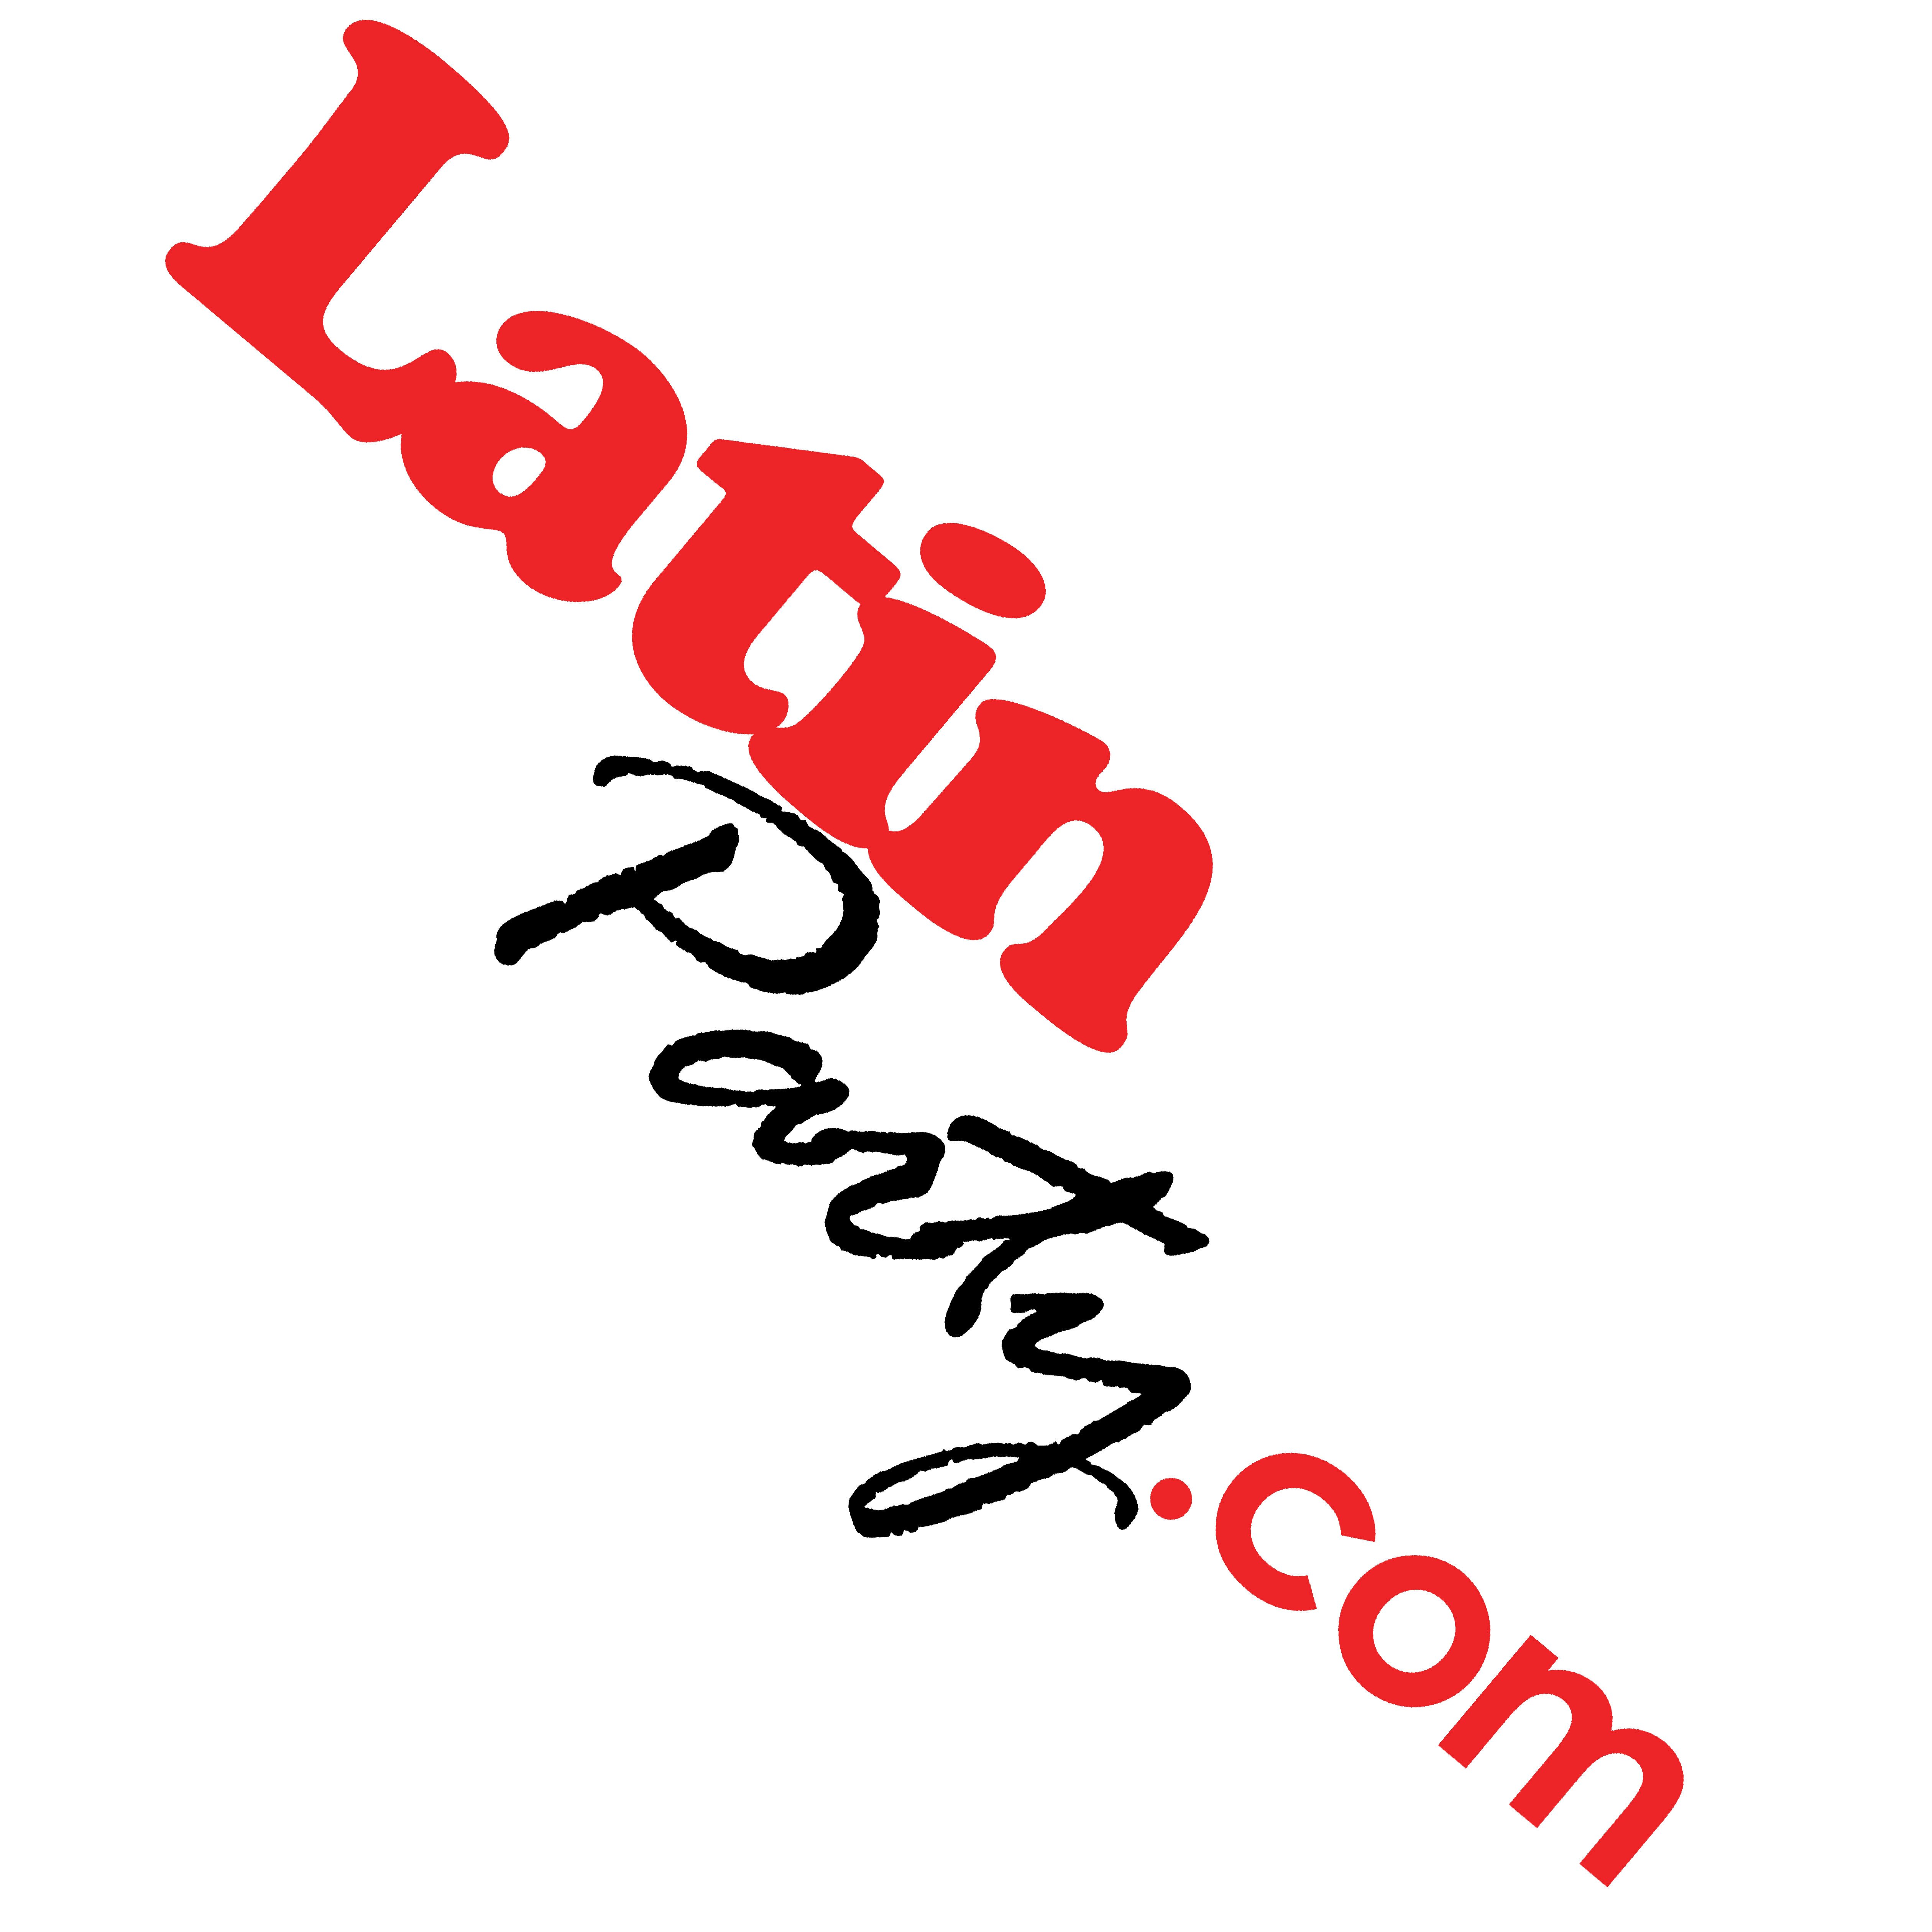 We organize the TOP Latin Events in NYC, Salsa! Bachata! Reggaeton! Merengue! Y mas! visit http://t.co/PJq5xWLpEw or text 917.684.8584